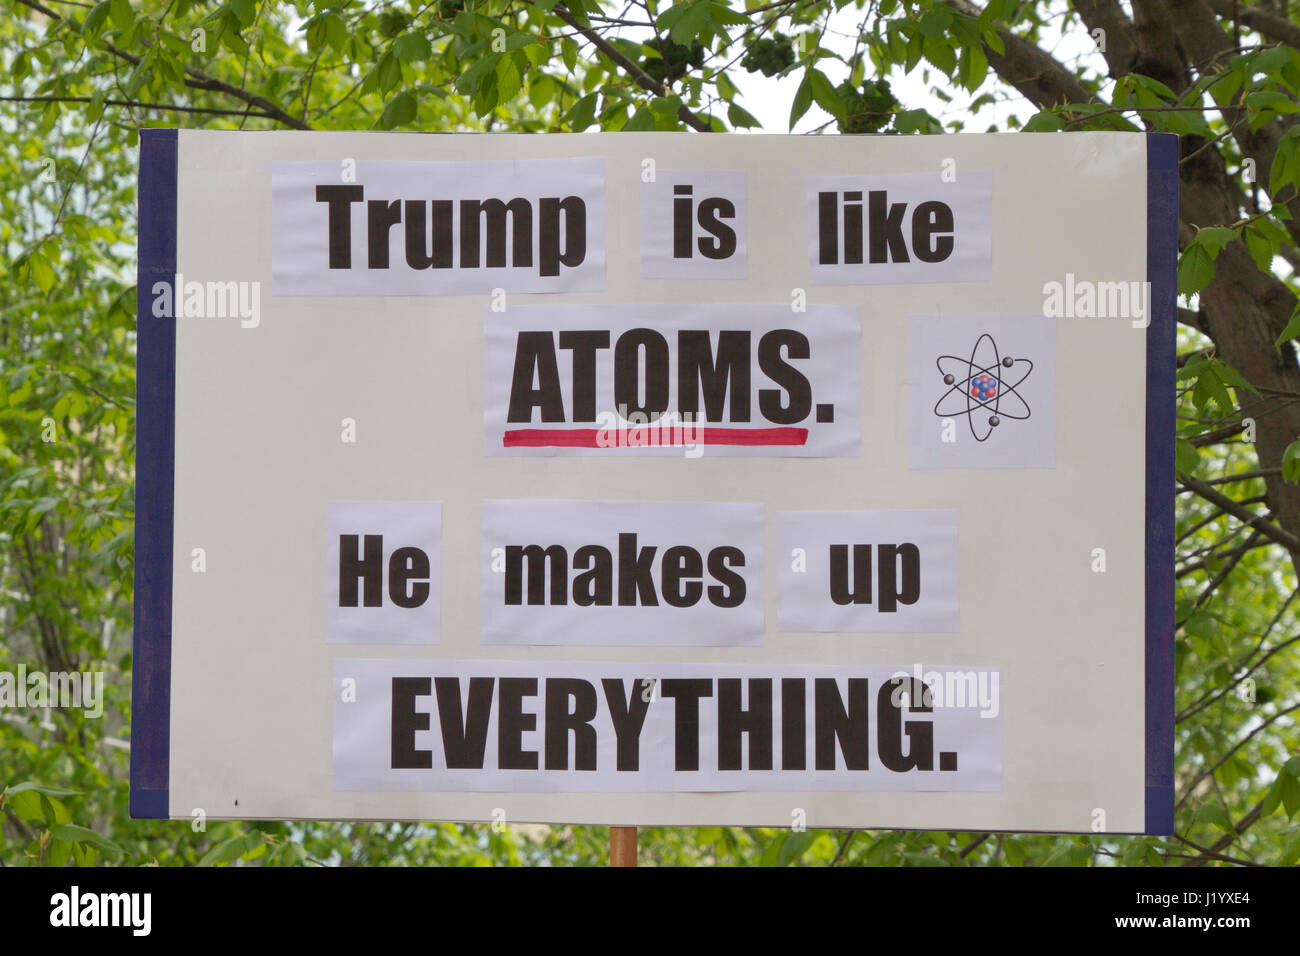 Asheville, North Carolina, USA: April 22, 2017 - Close up of a funny political sign that says 'Trump Is Like Atoms, He Makes Up EVERYTHING' displayed at the 2017 Earth Day March For Science rally protesting current Trump lies and anti-science stance. April 22, 2017 in Asheville, NC. Stock Photo